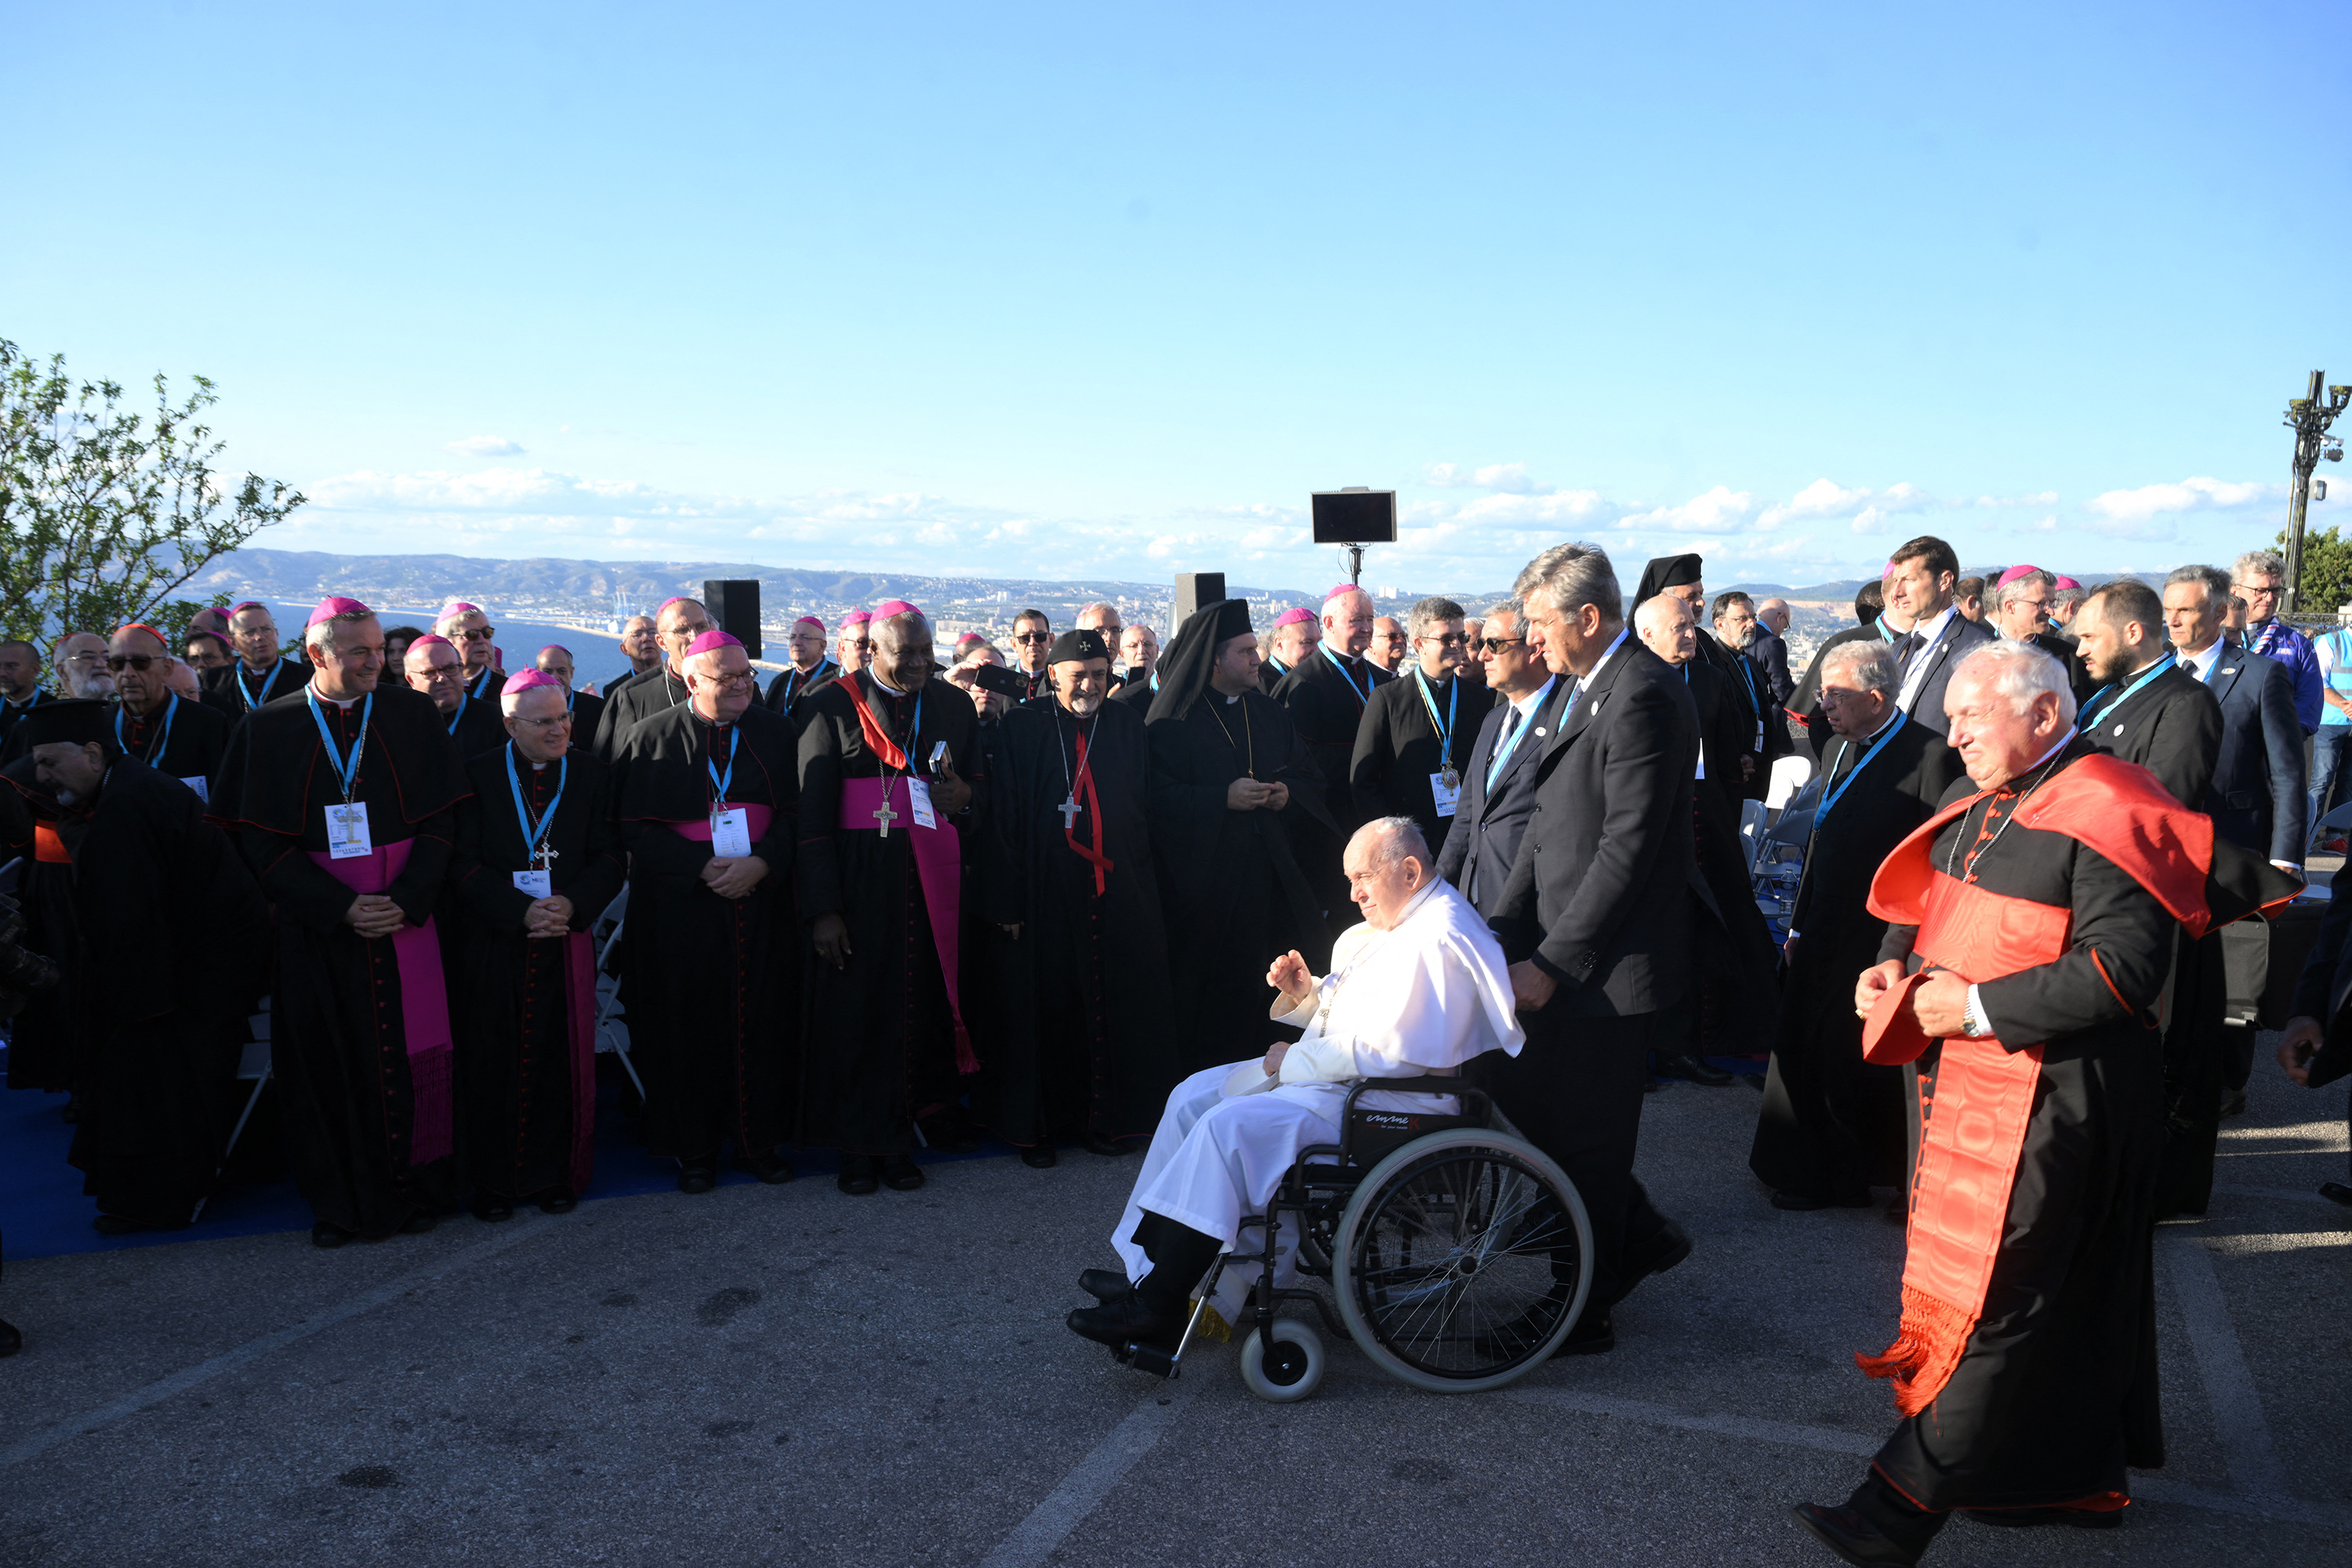 Pope Francis arrives to pay homage at the memorial dedicated to sailors and migrants lost at sea at the Basilica of Notre-Dame de la Garde in Marseille